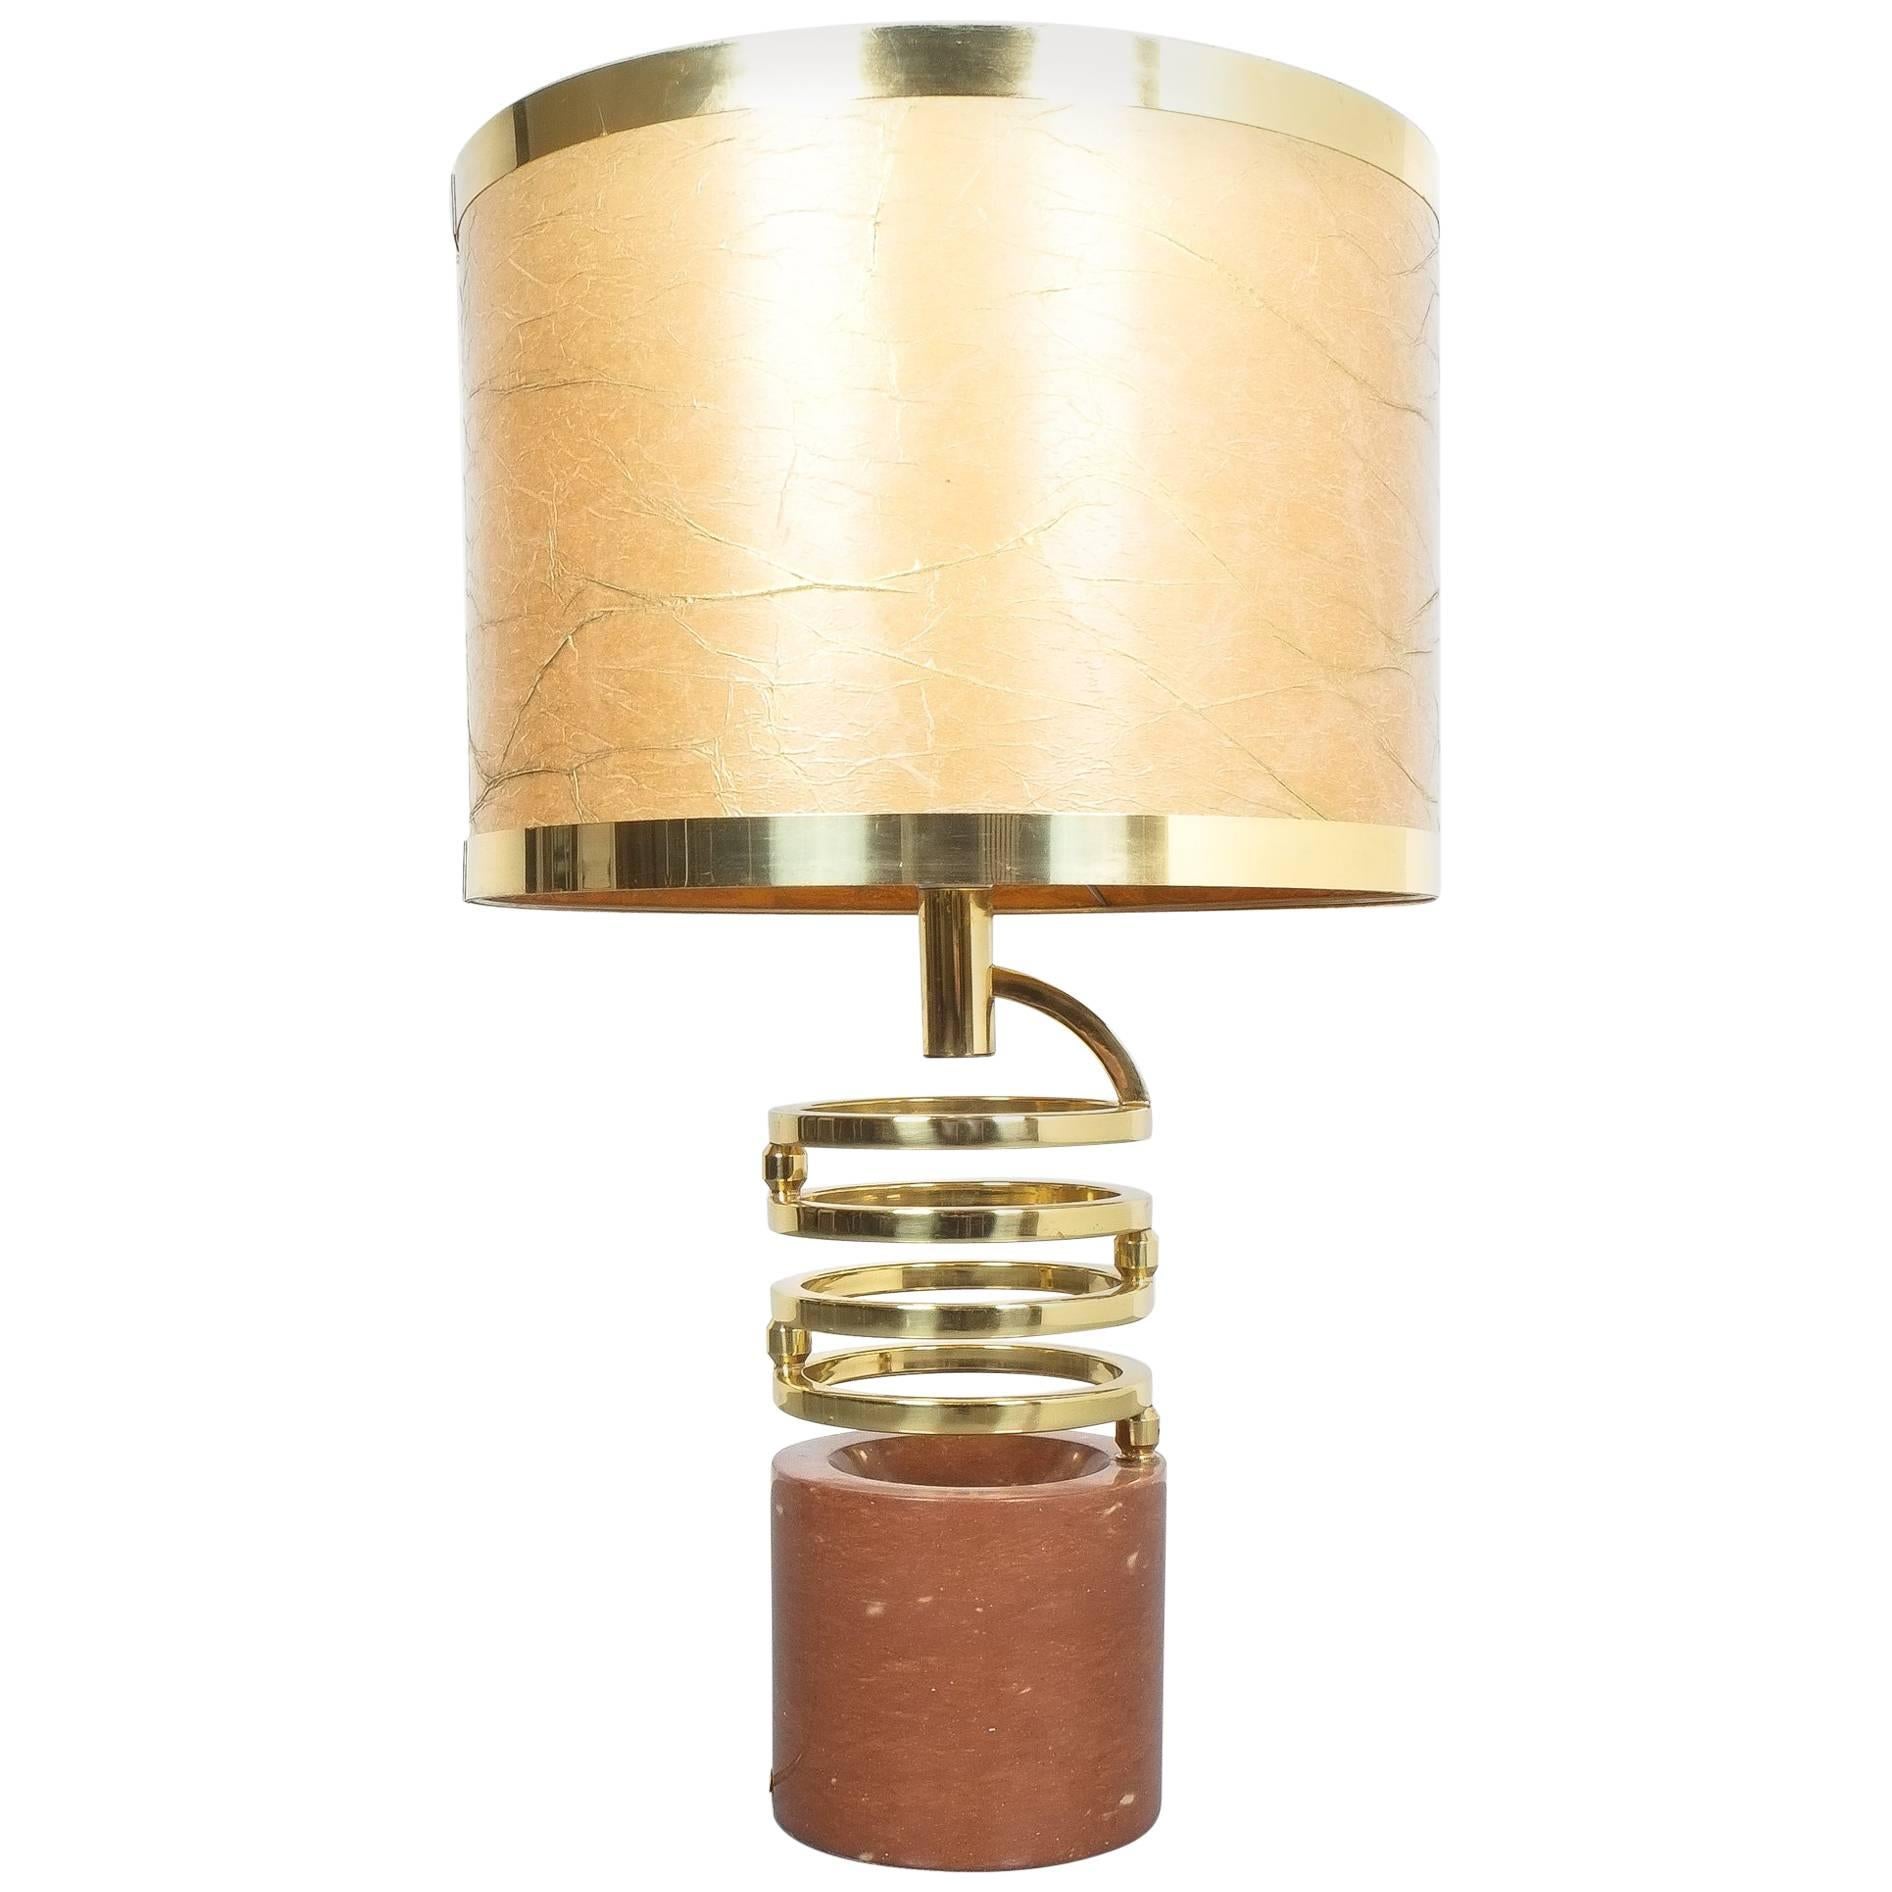 Willy Rizzo adjustable table lamp for BF,  Red marble brass, 1970. Rare adjustable table lamp with a heavy foot from red marble and revolvable rings from brass. Original 1970 shade. The condition is very good, the joints are working fine, extended